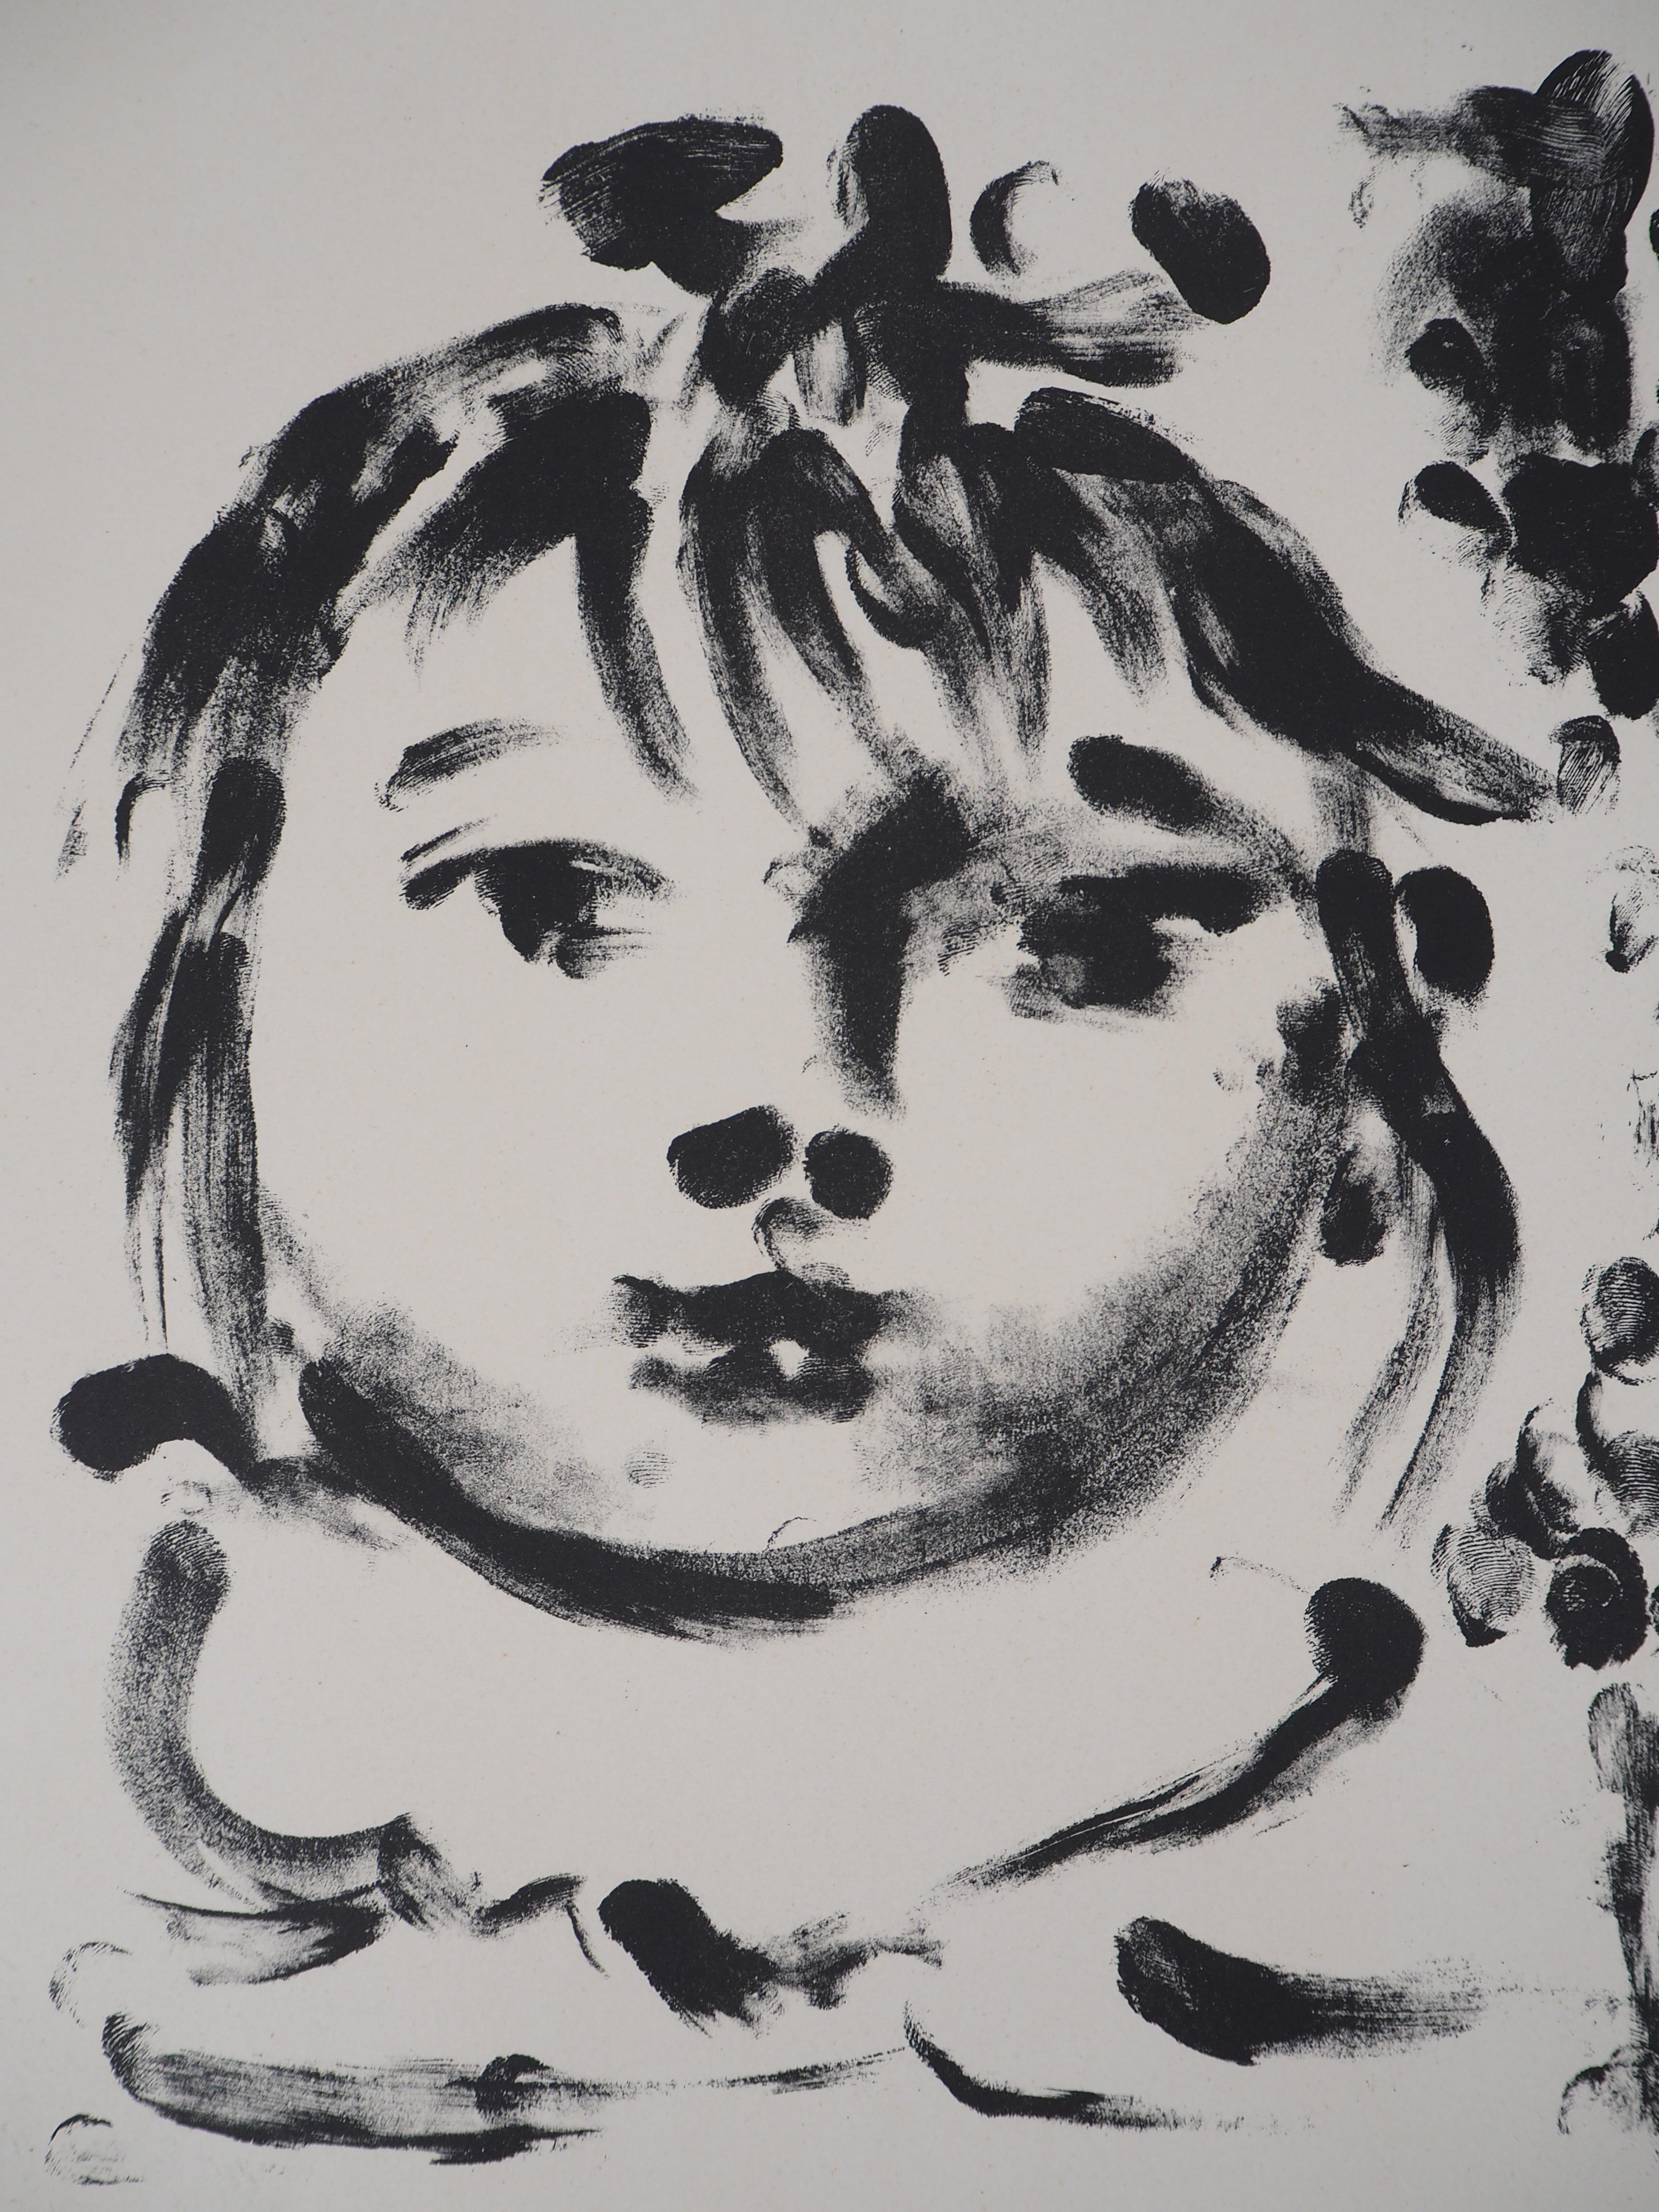 Children : Claude and Paloma - Original lithograph, Handsigned (Bloch #664) - Modern Print by Pablo Picasso